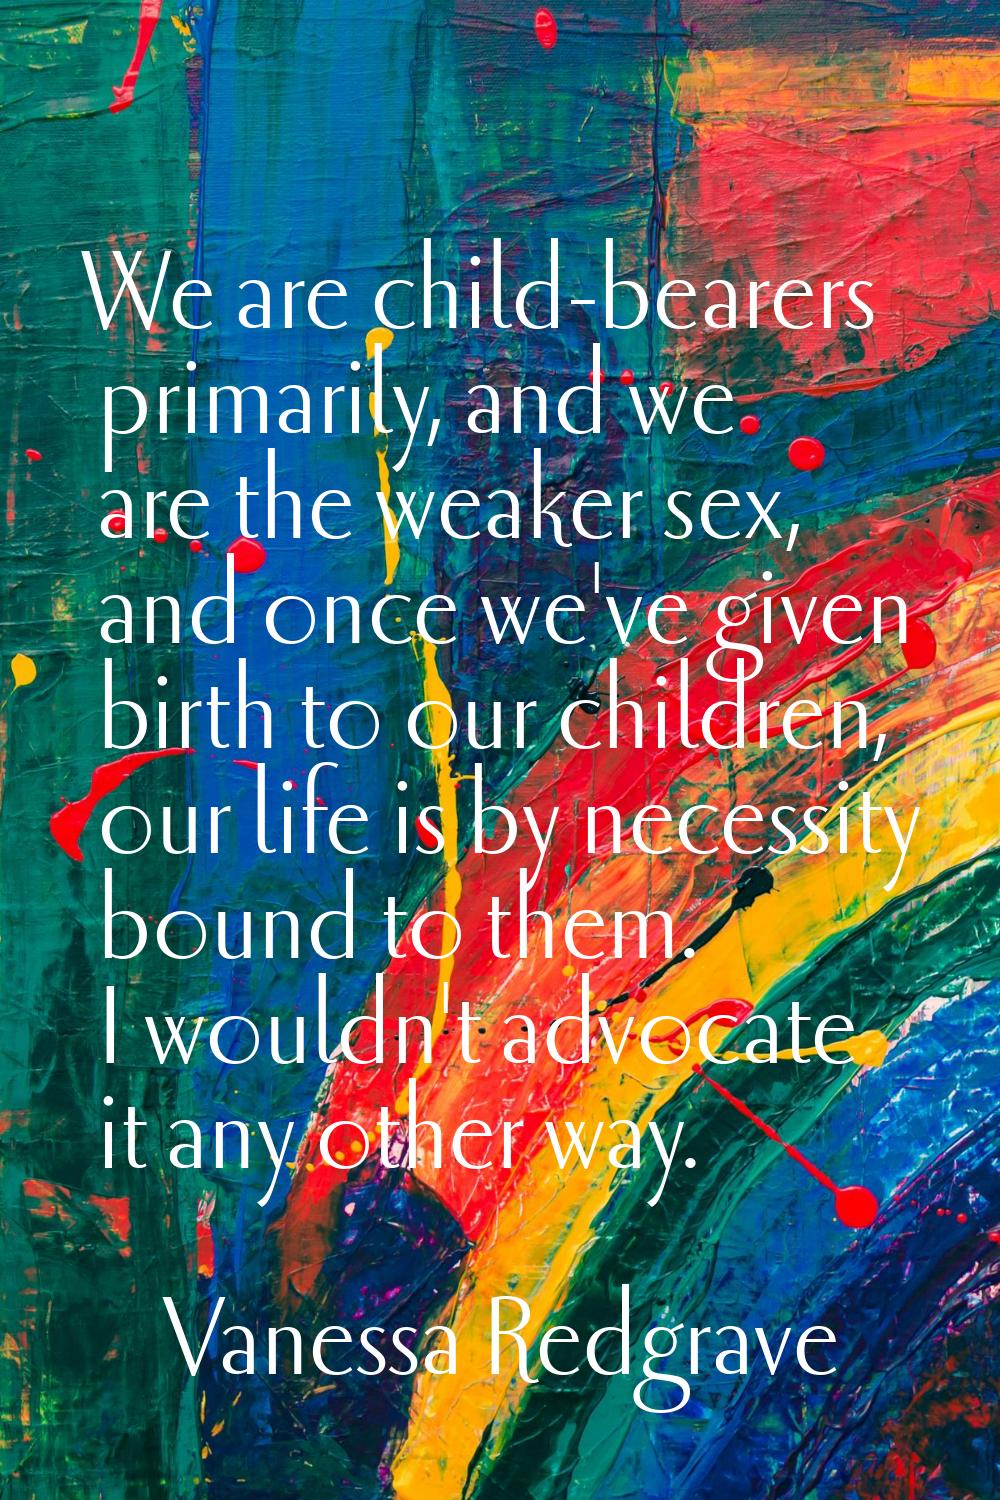 We are child-bearers primarily, and we are the weaker sex, and once we've given birth to our childr